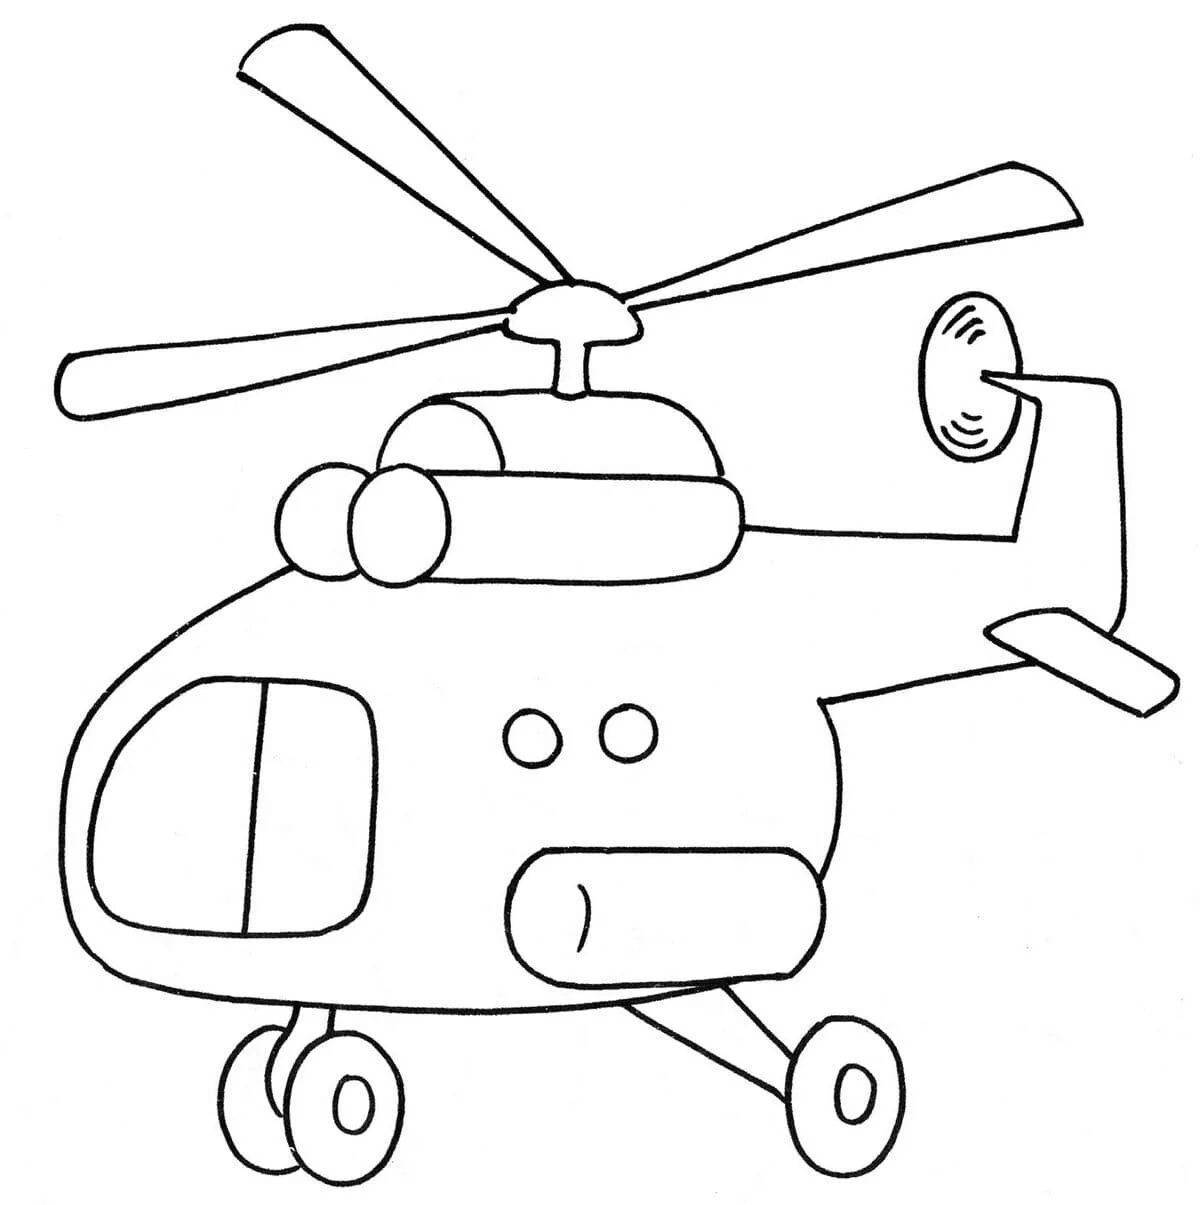 Attractive military helicopter coloring pages for kids